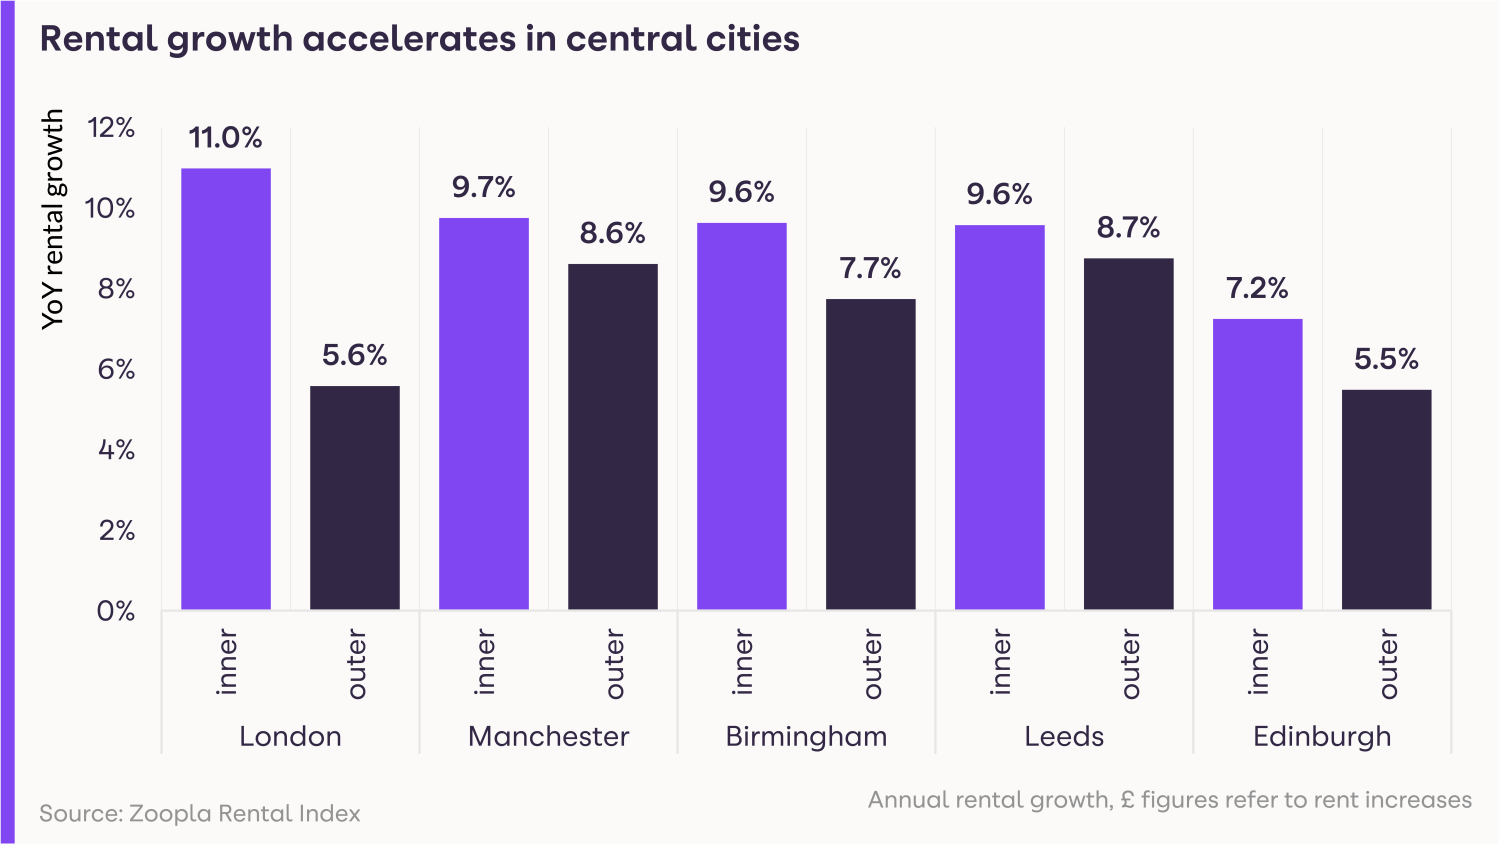 Rental growth accelerates in central cities - RMR Jan 2022